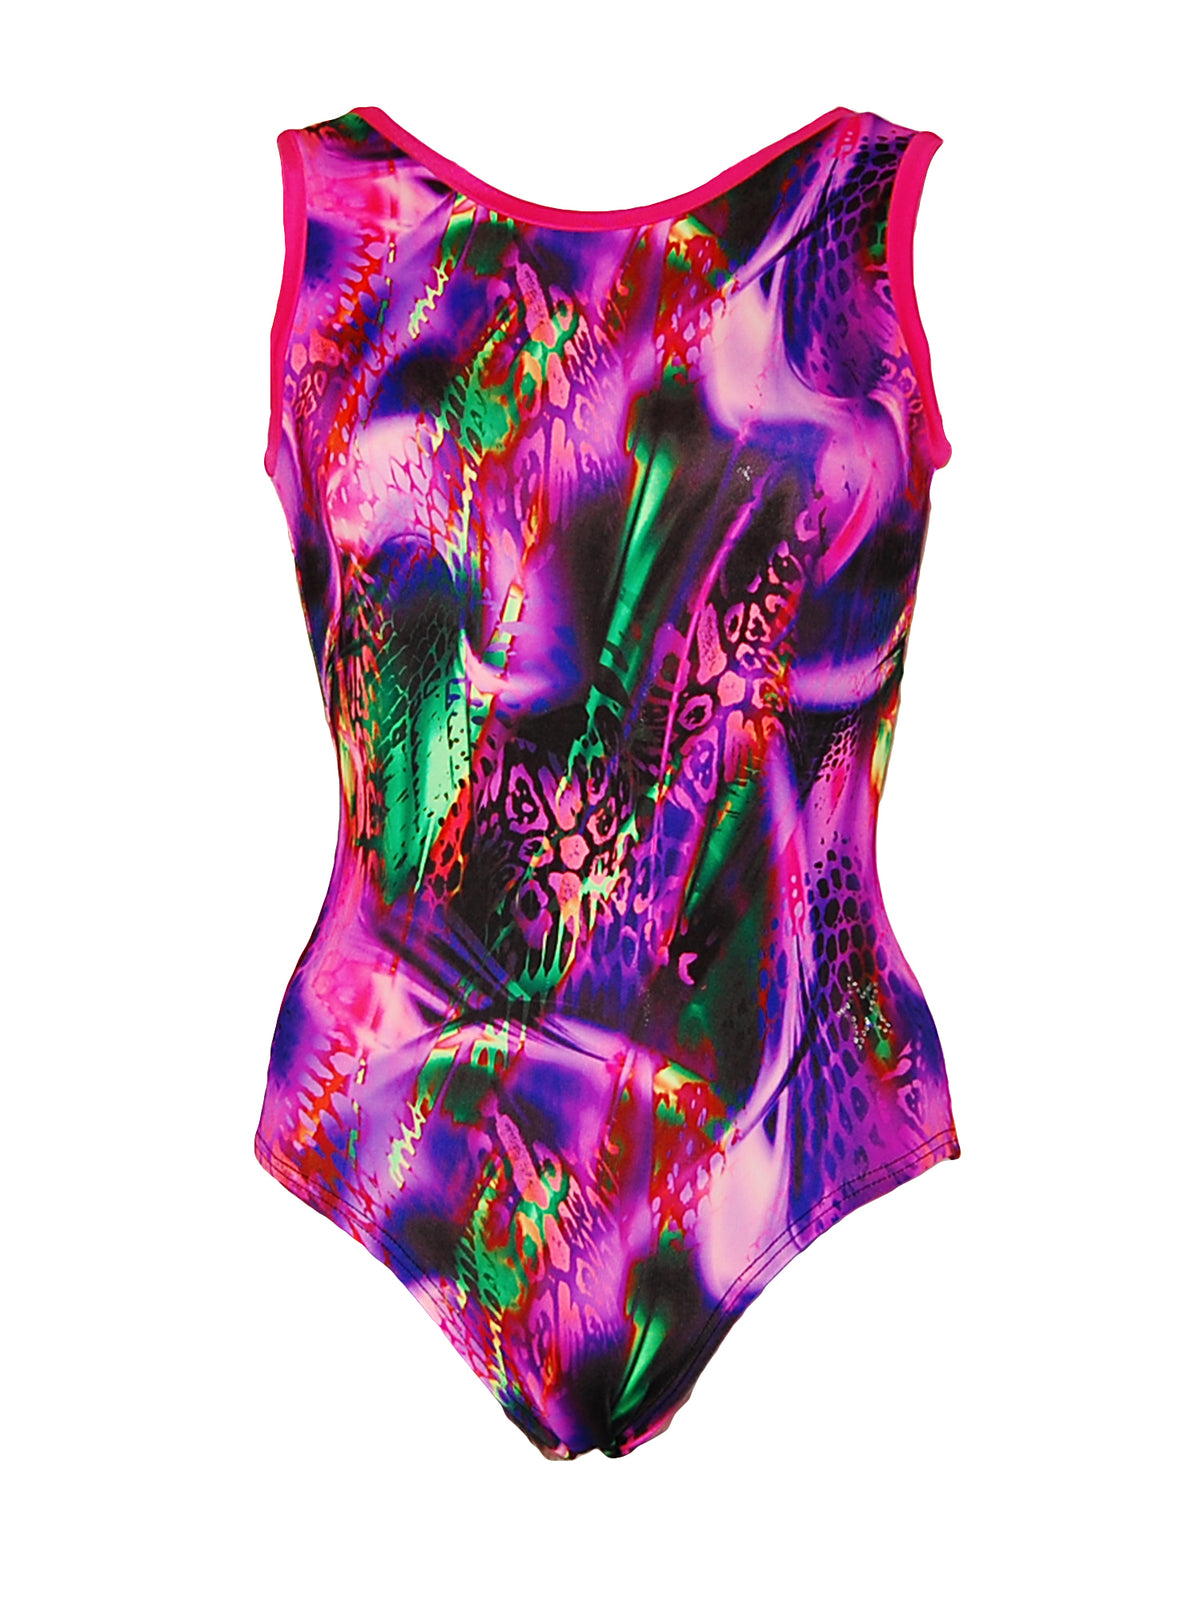 Front image of tank style leotard